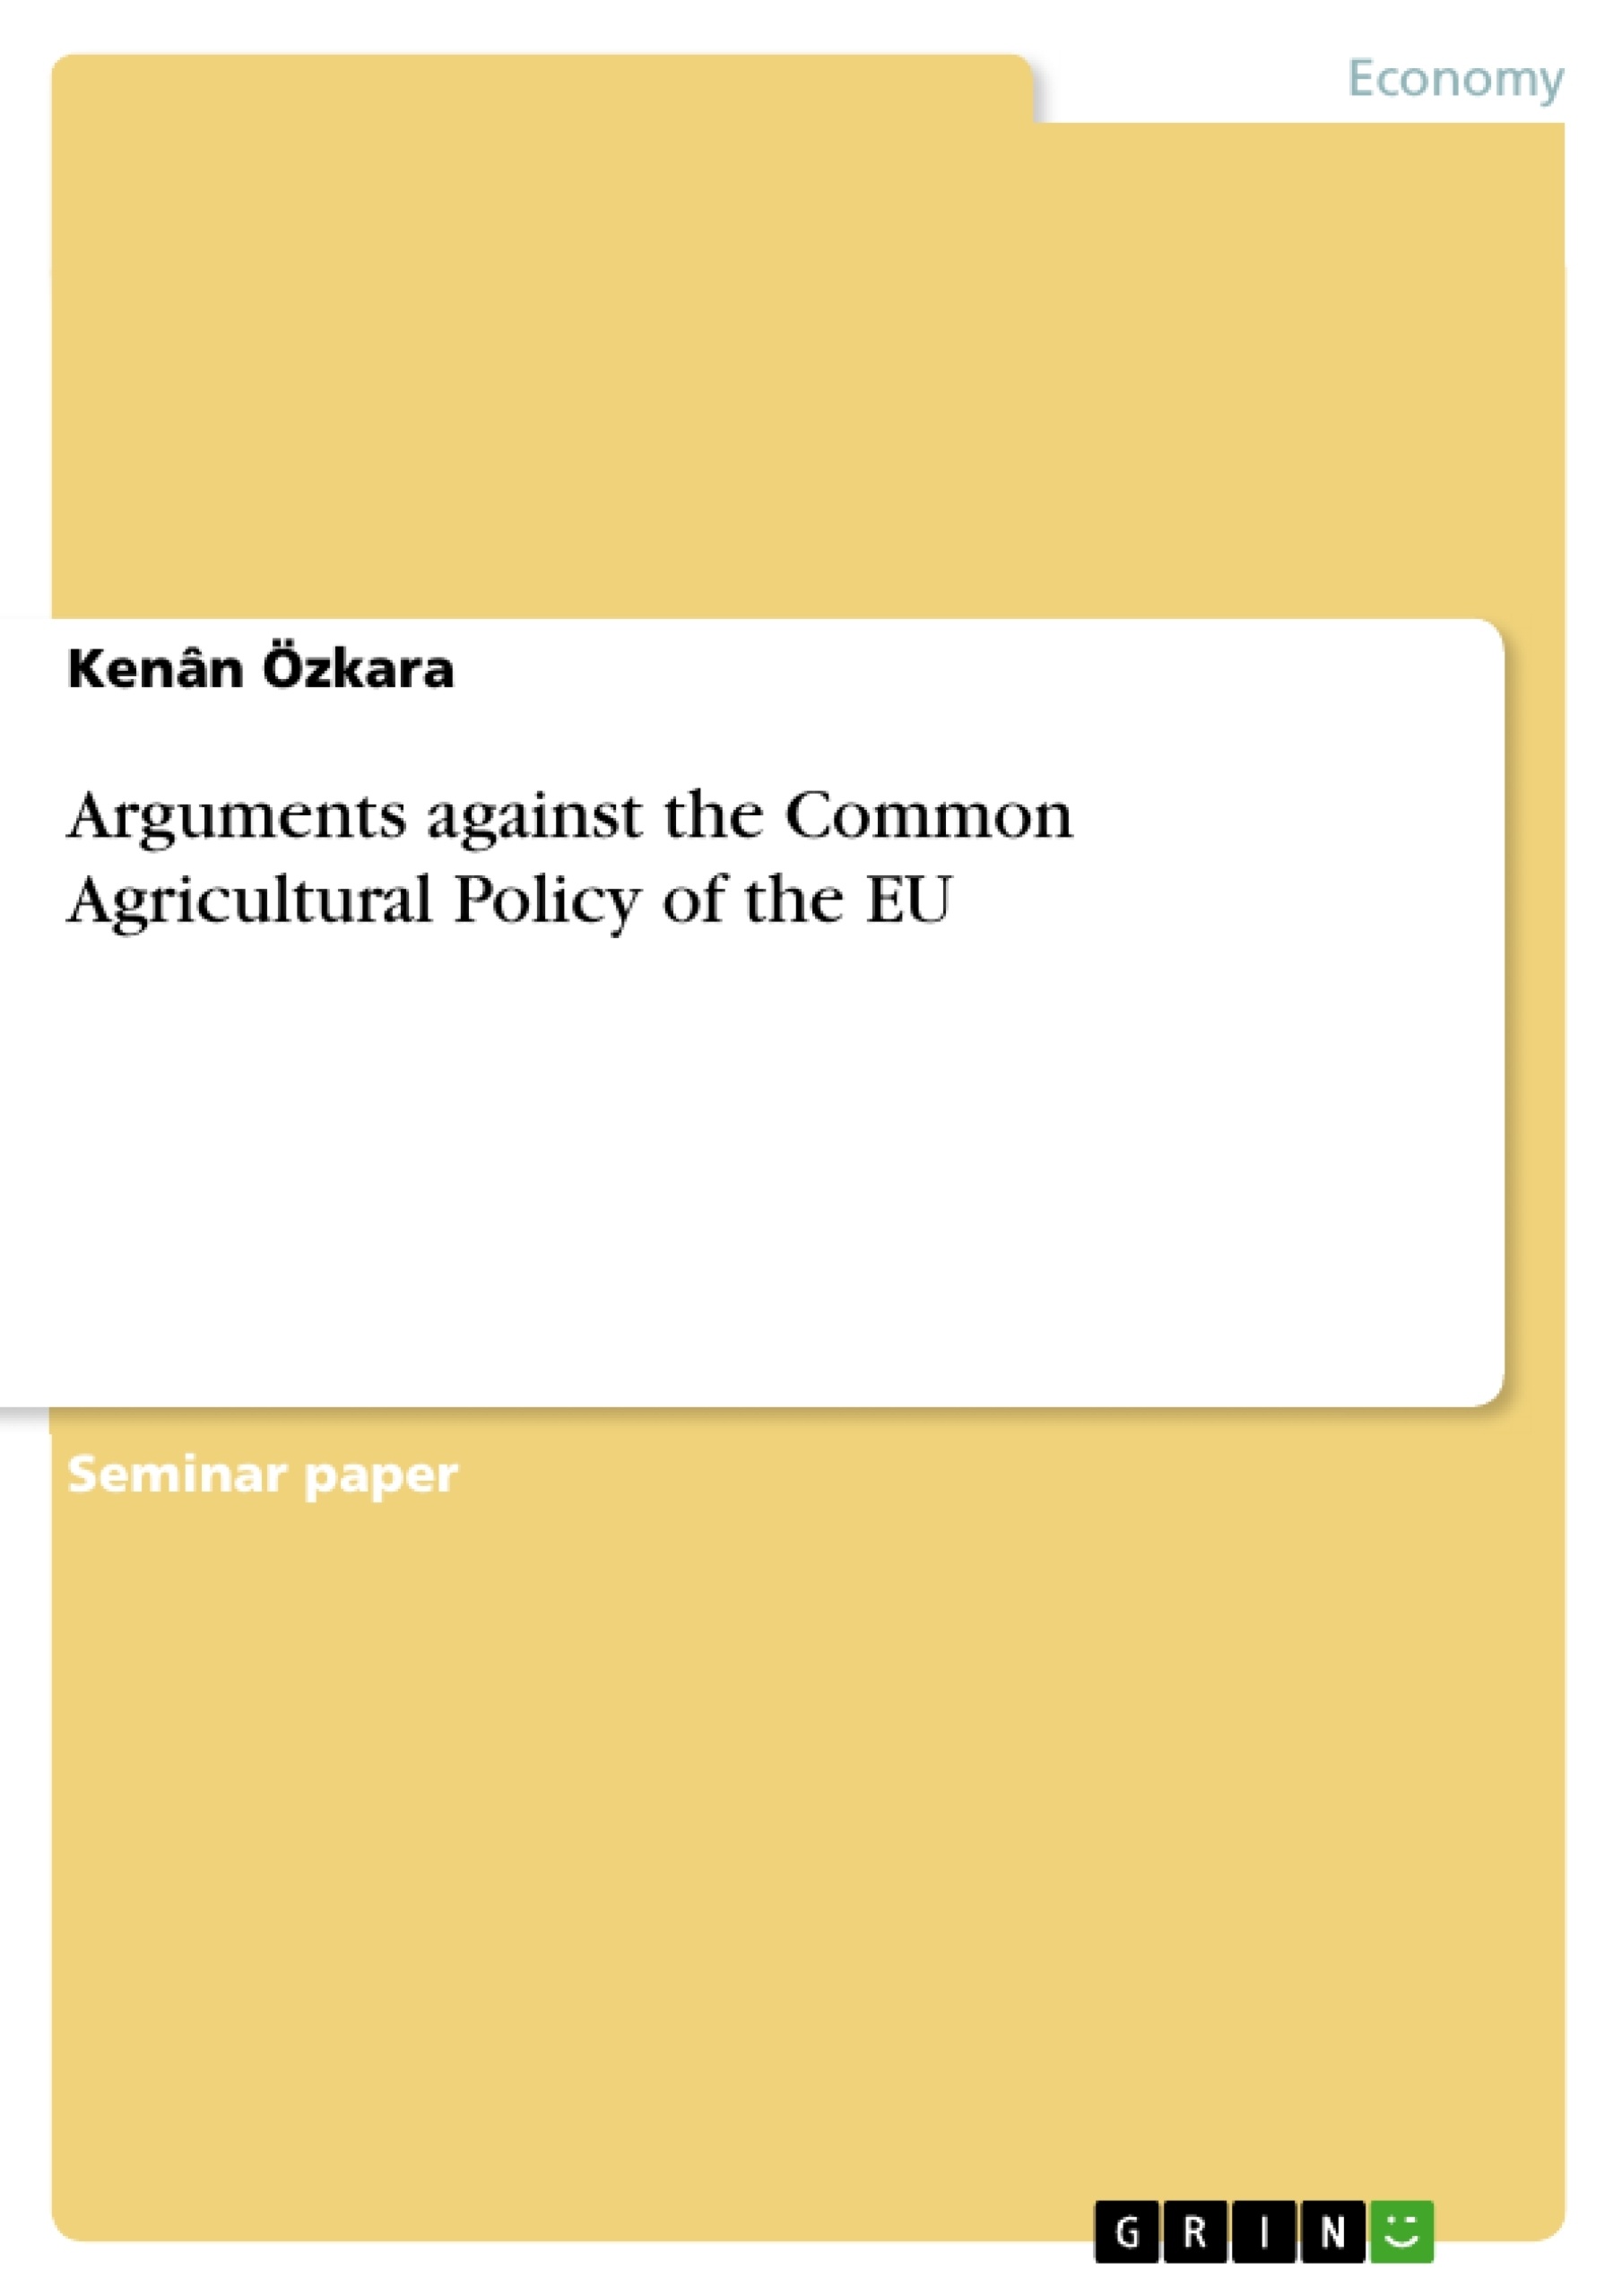 Title: Arguments against the Common Agricultural Policy of the EU